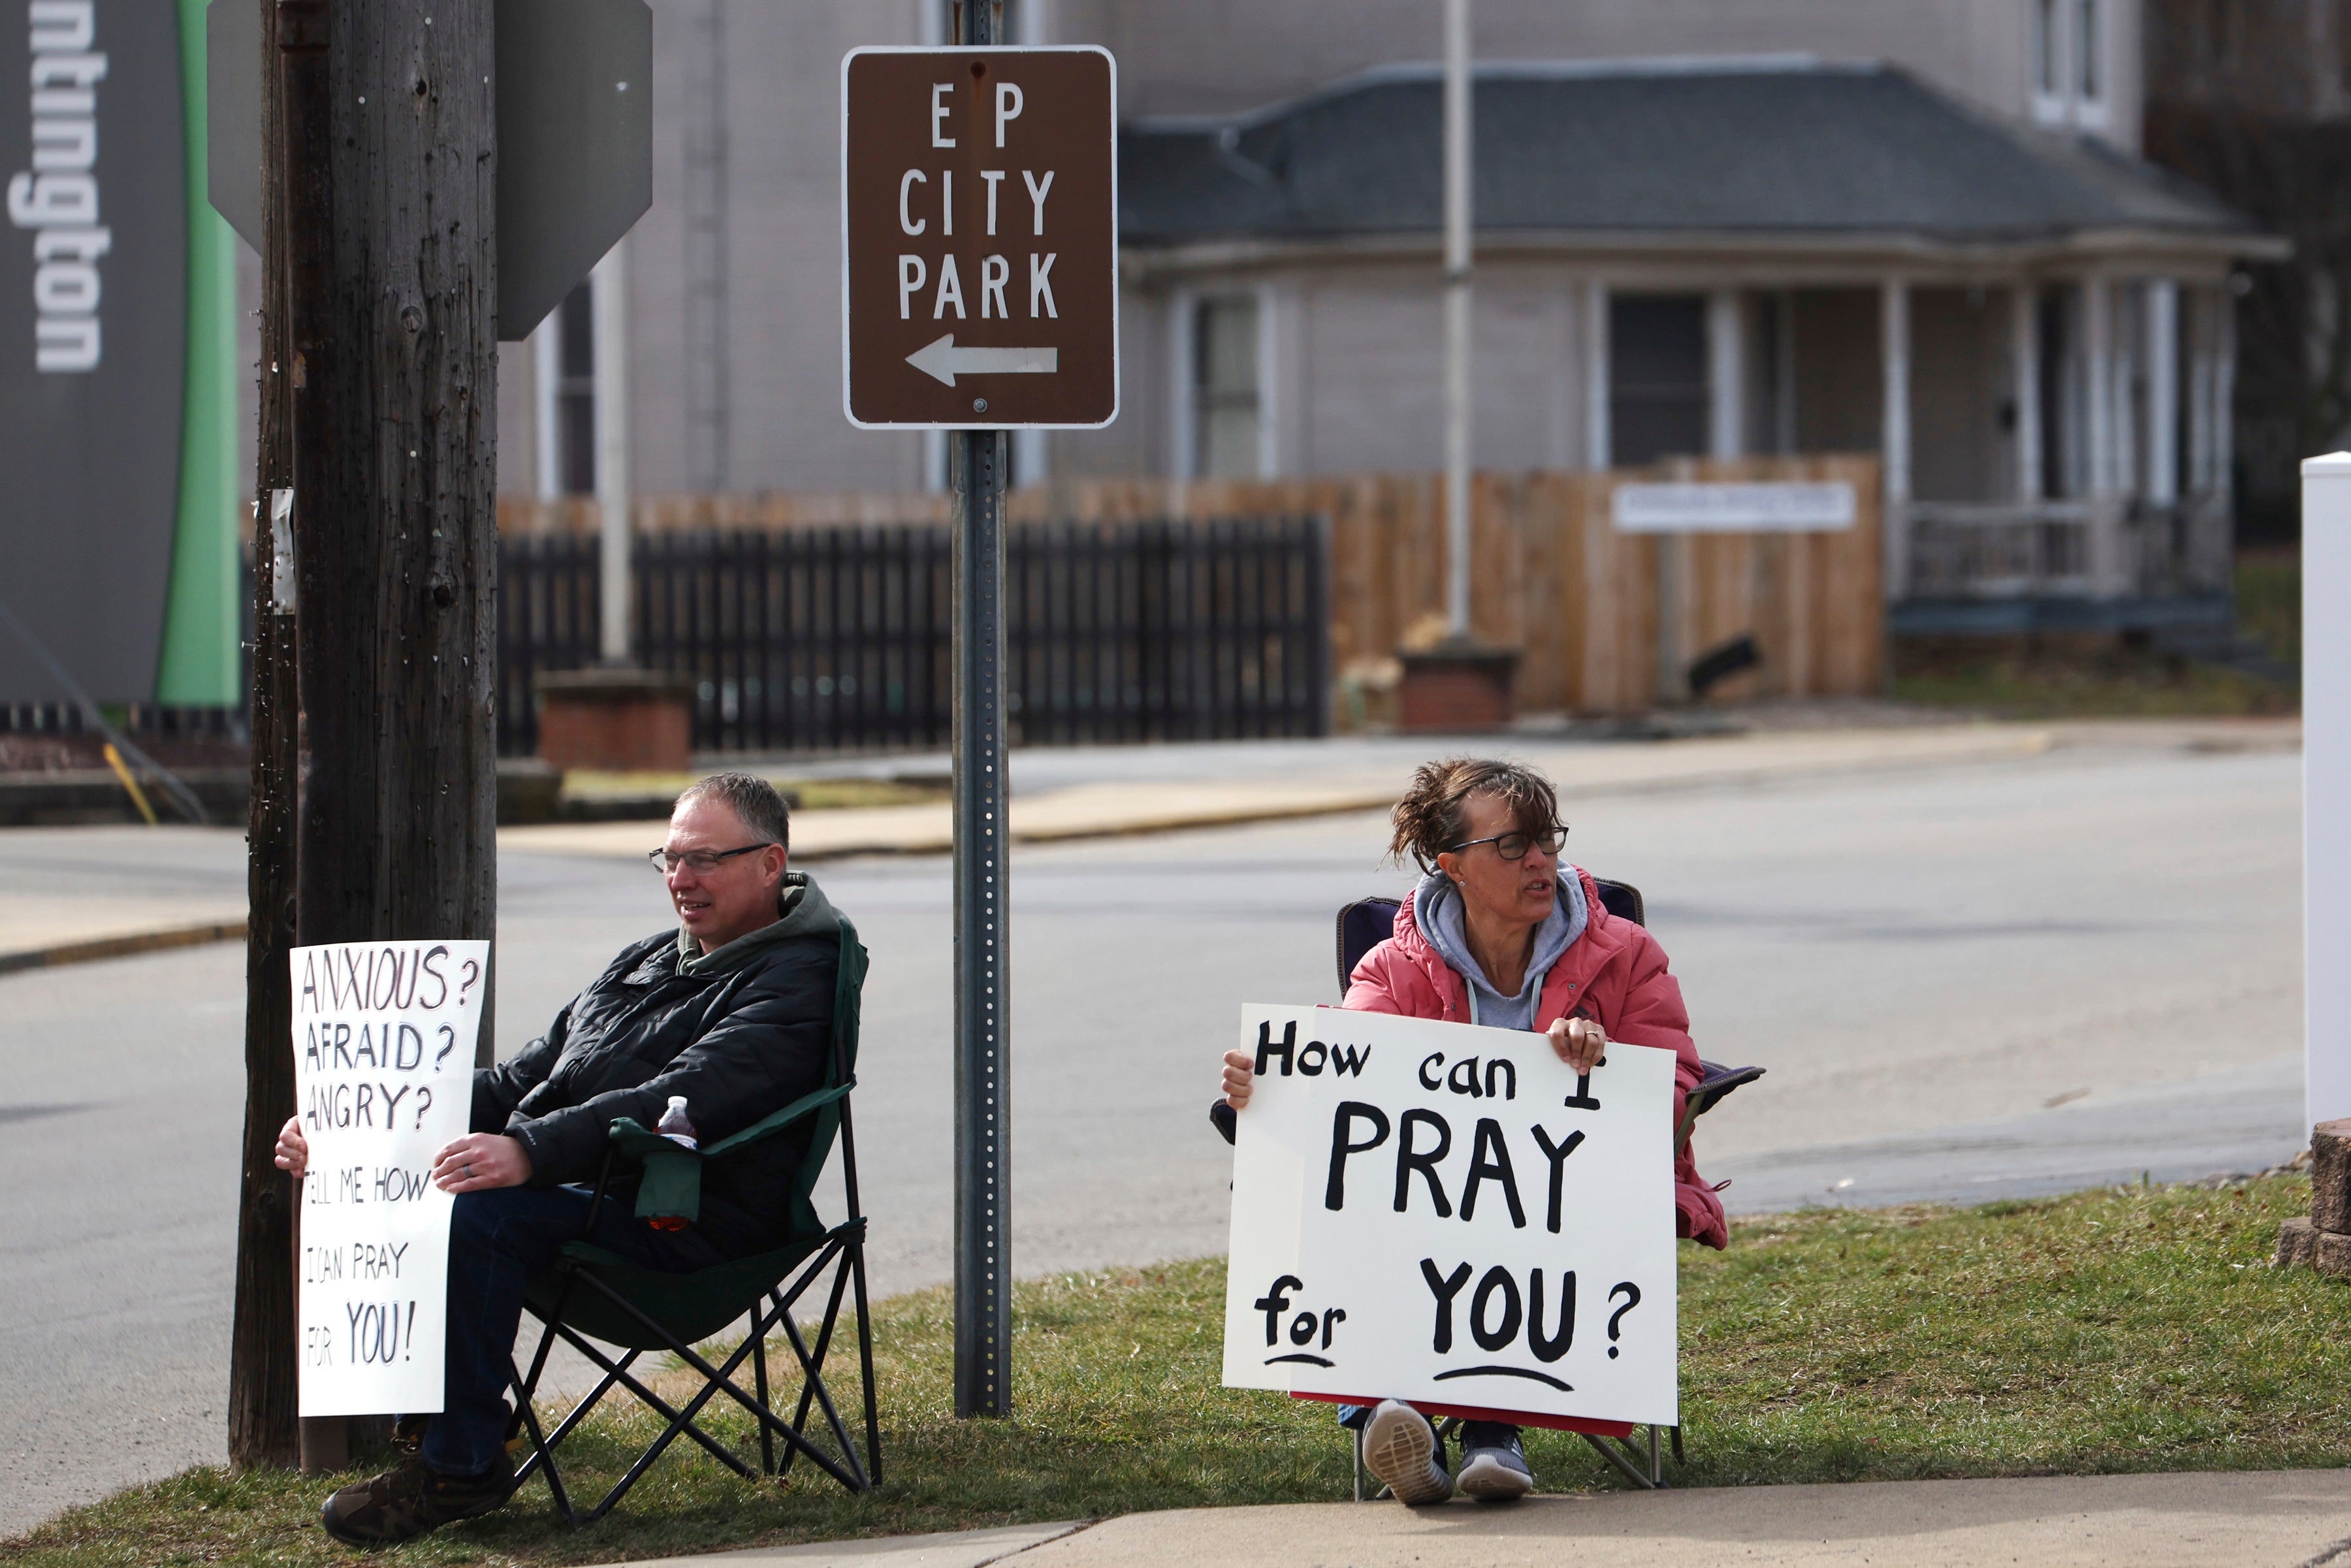 Community members offer support 2 weeks after a train derailment containing toxic chemicals were released in East Palestine, Ohio. (Photo: mpi34/MediaPunch /IPX, AP)